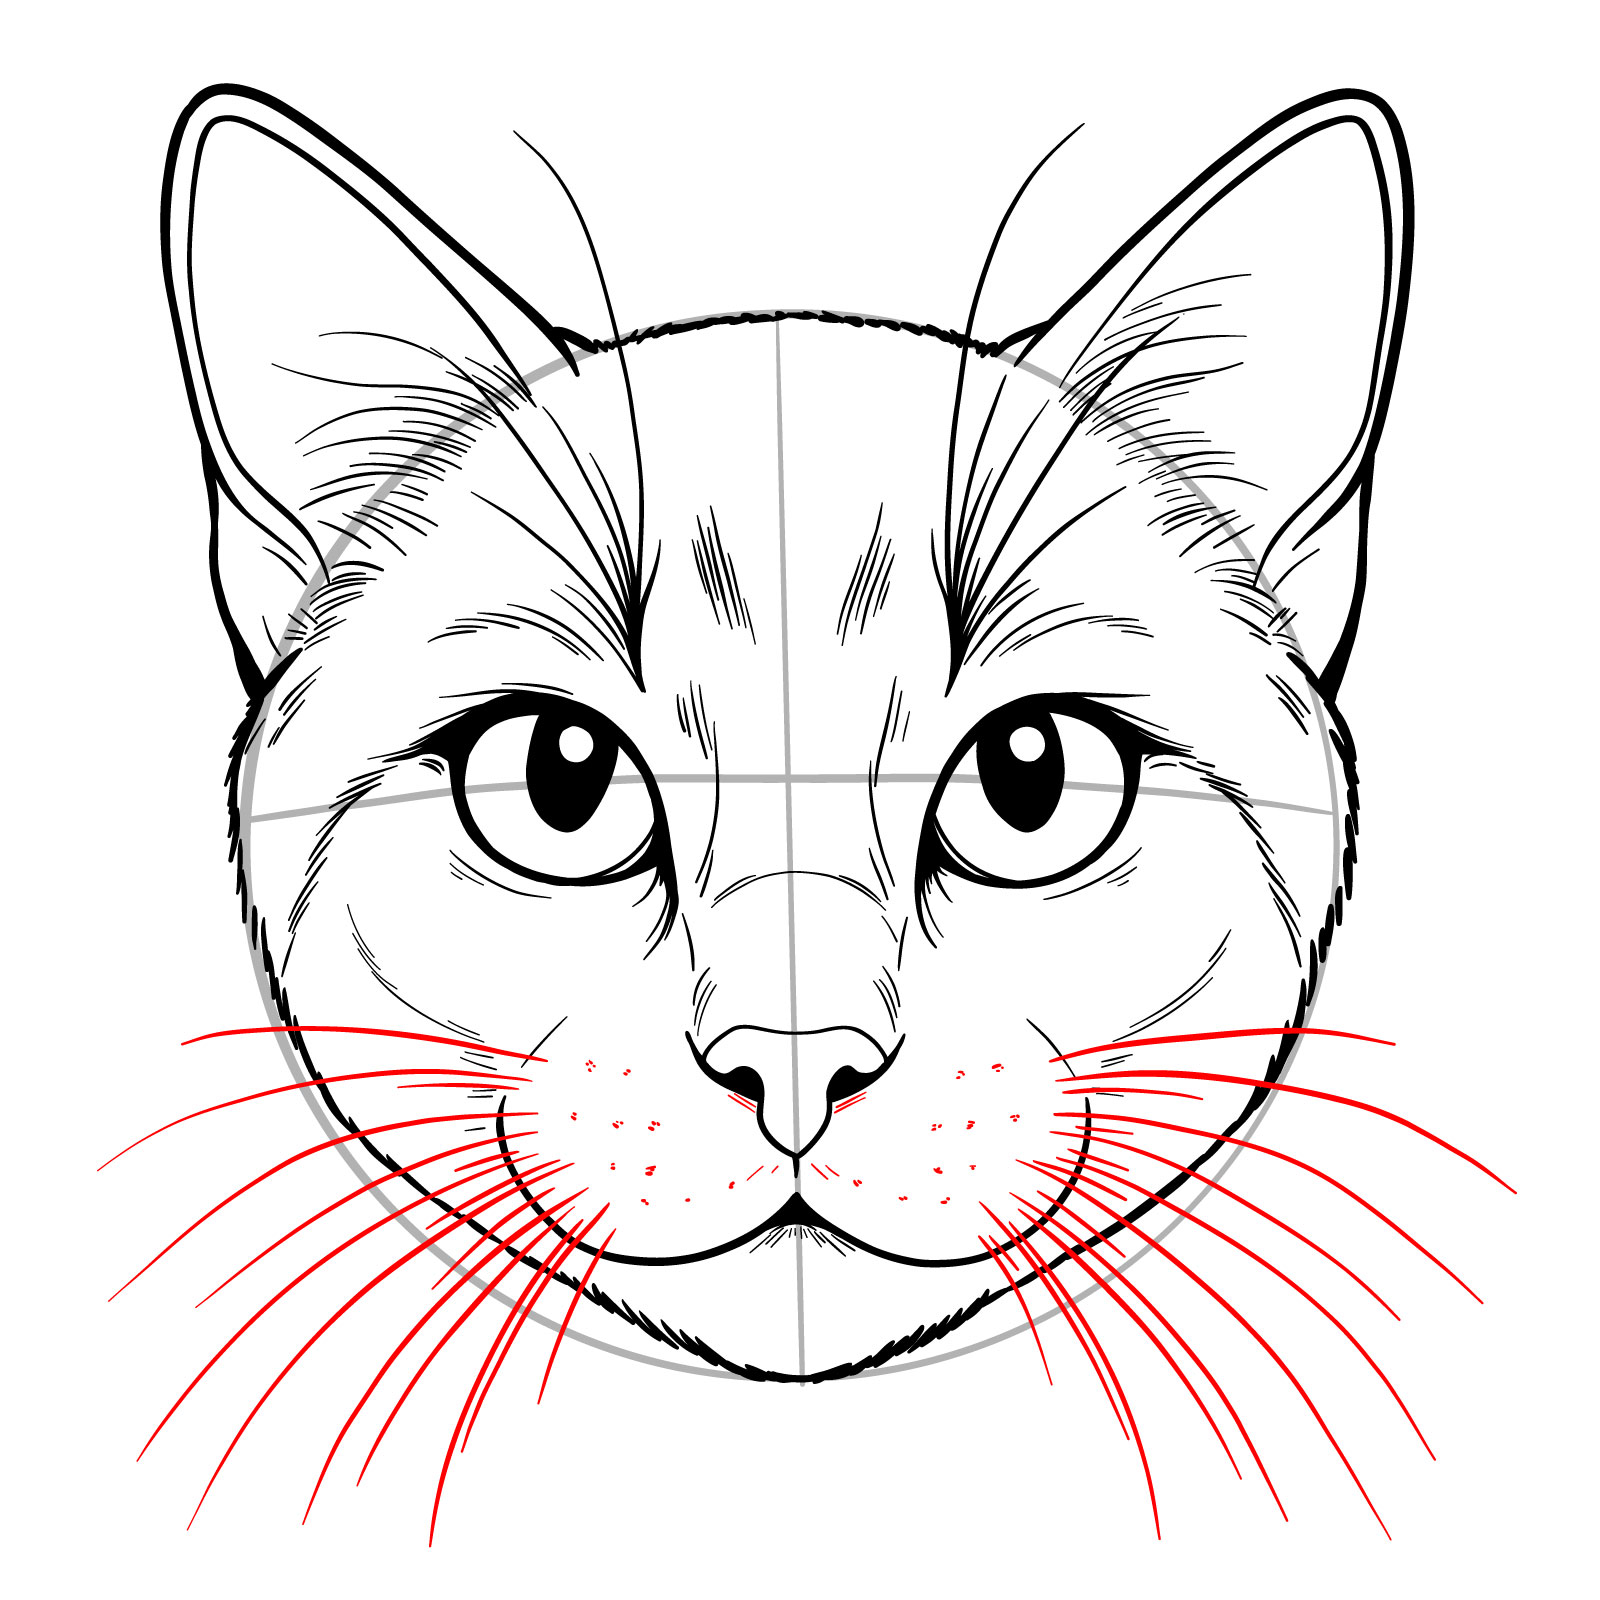 Cat's face drawing highlighting the whisker spots and patterns - step 11